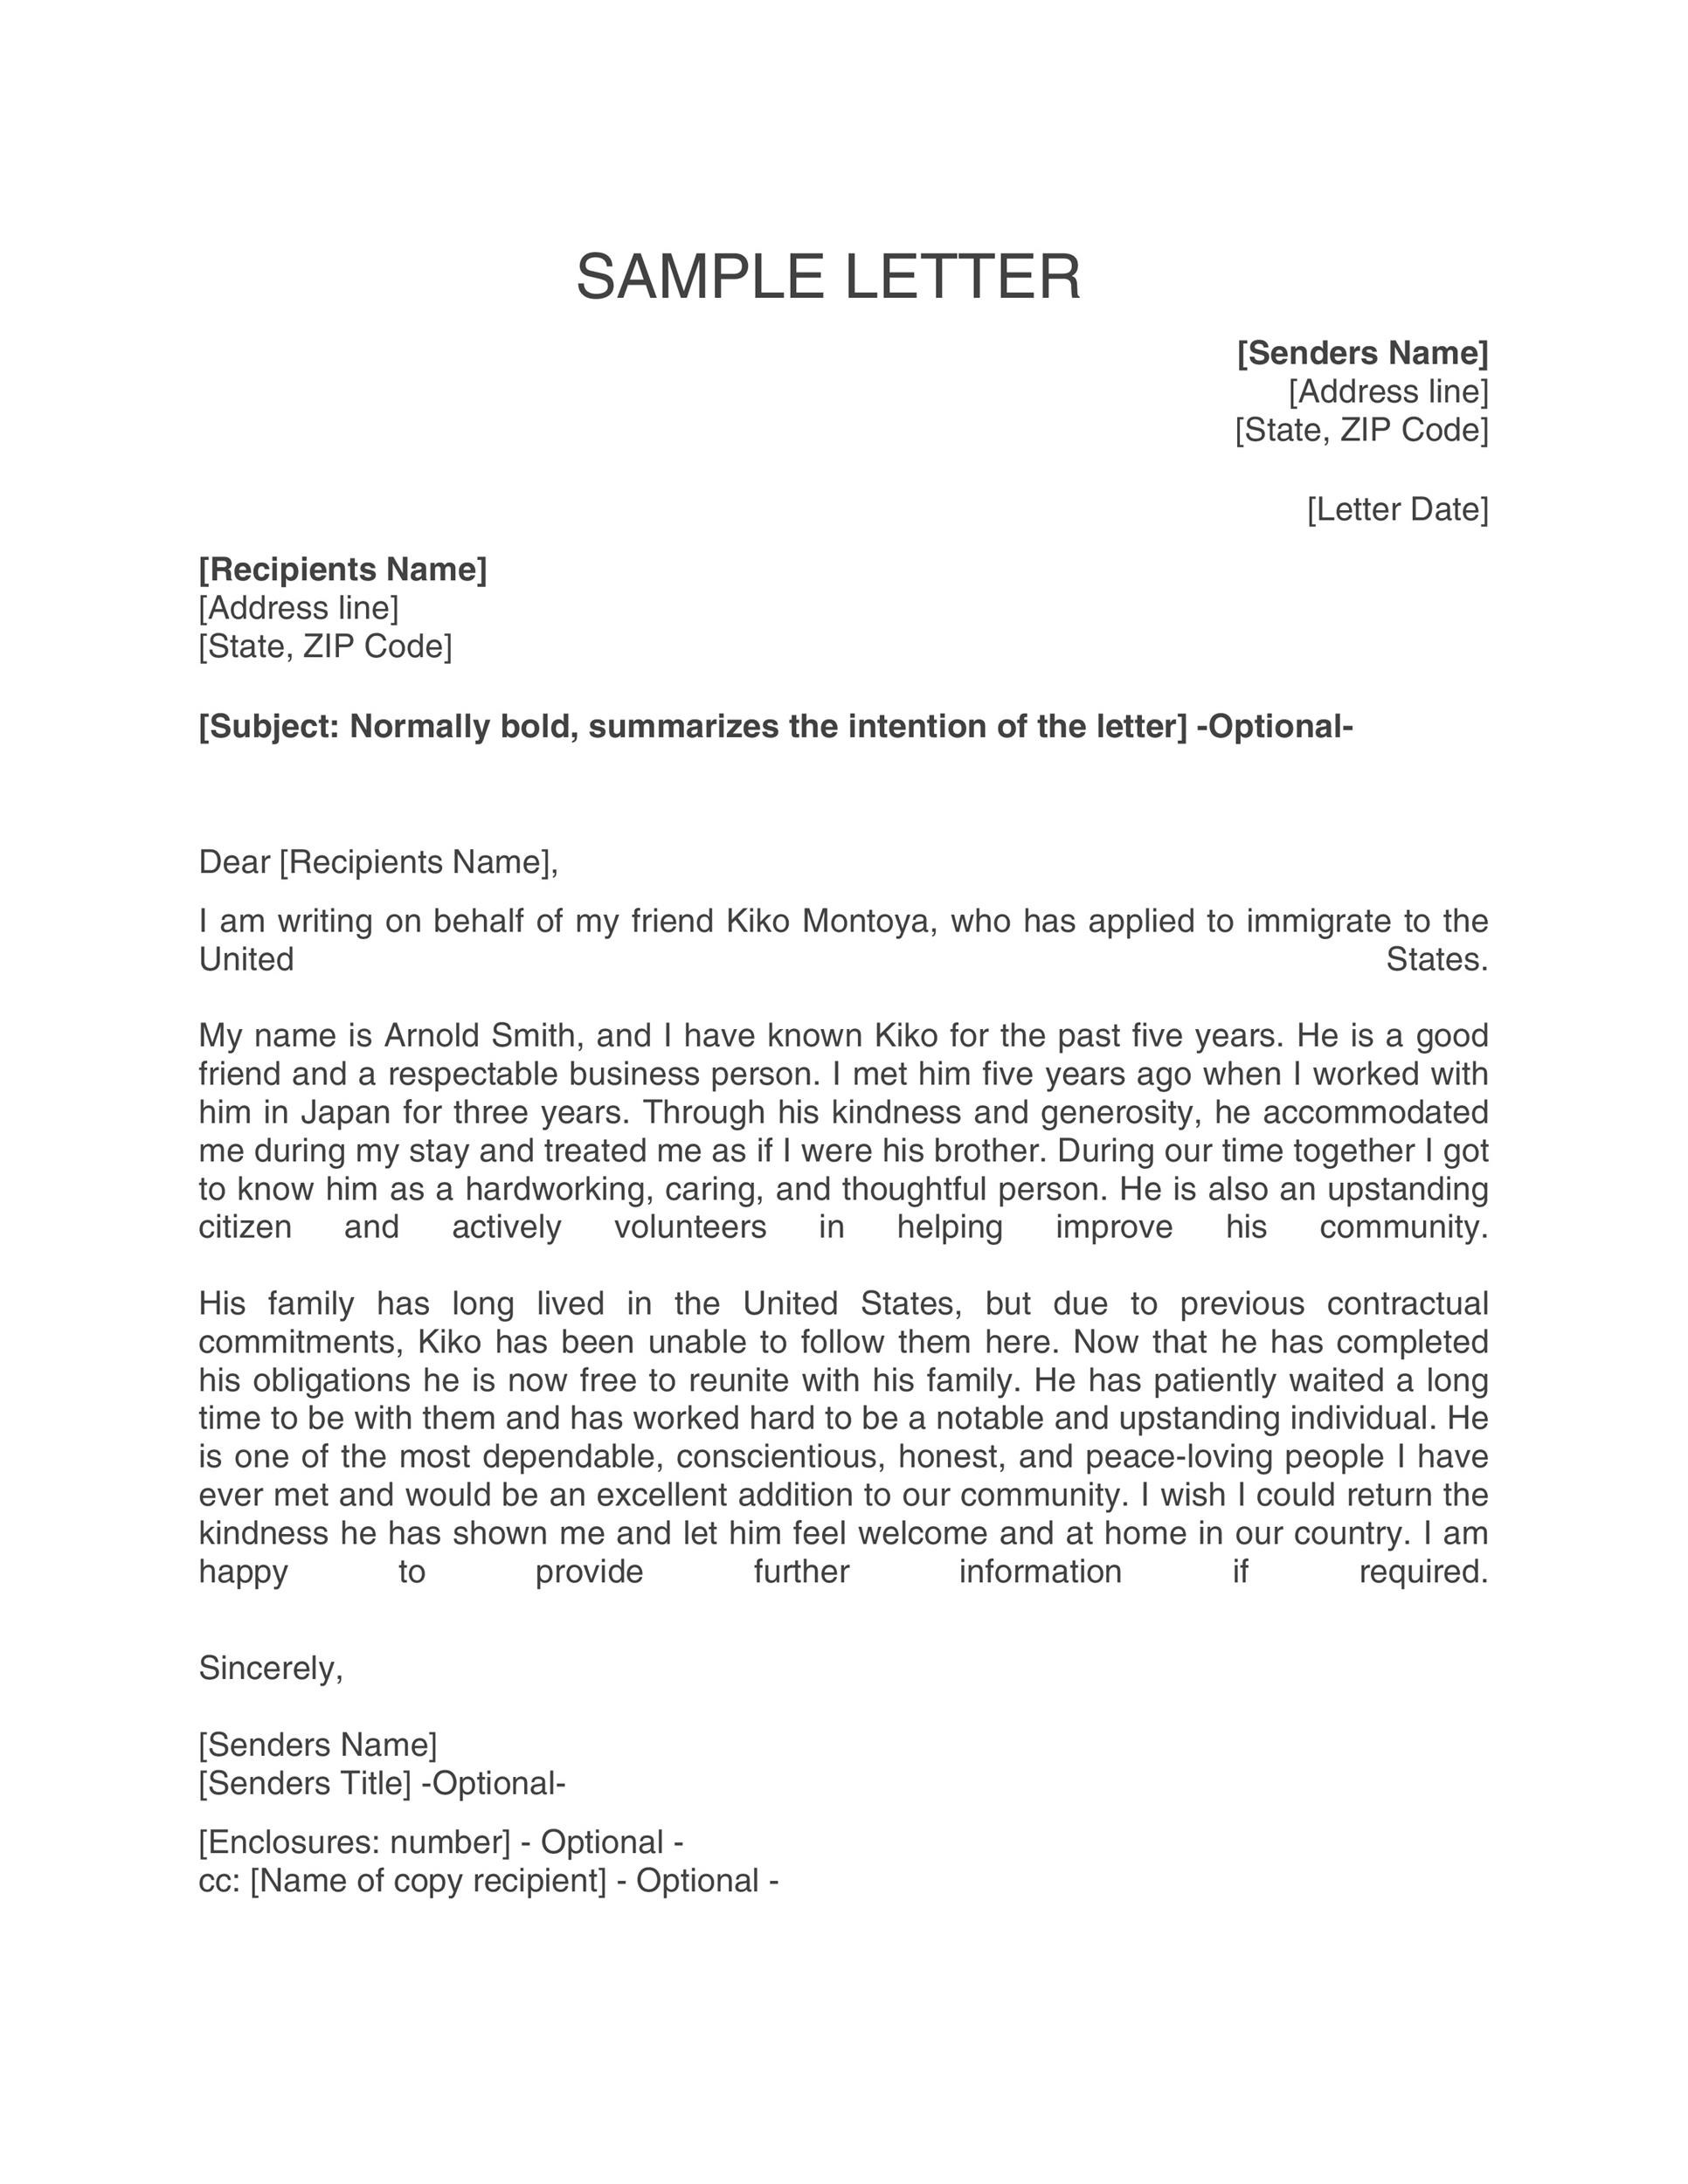 Sample Letter From Psychologist To Judge from templatelab.com